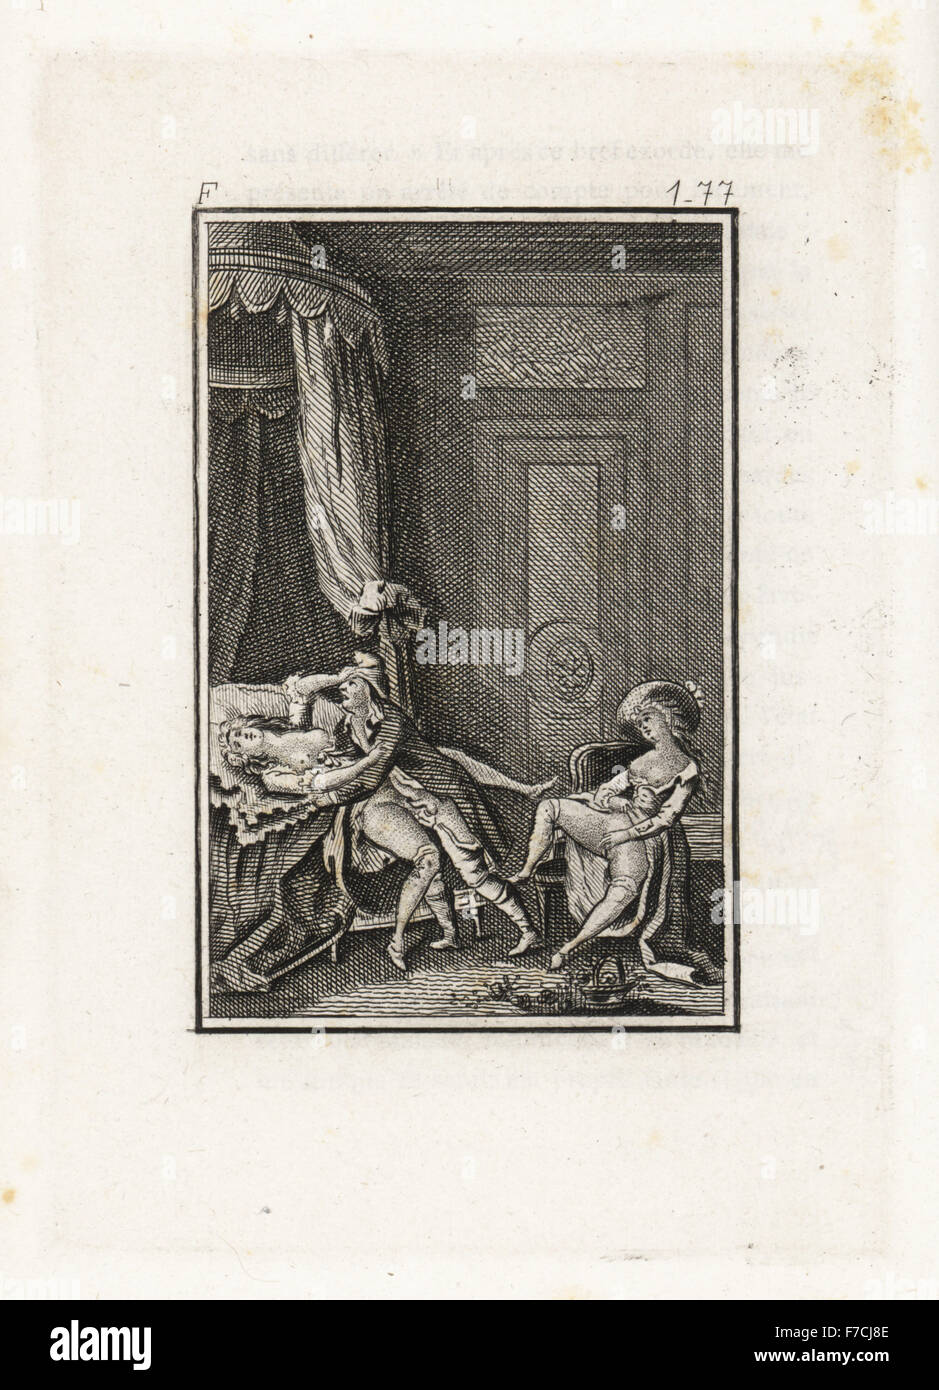 Erotic scene in a bedroom with gentleman having sex with a woman on a bed while another lady watches, 18th century image